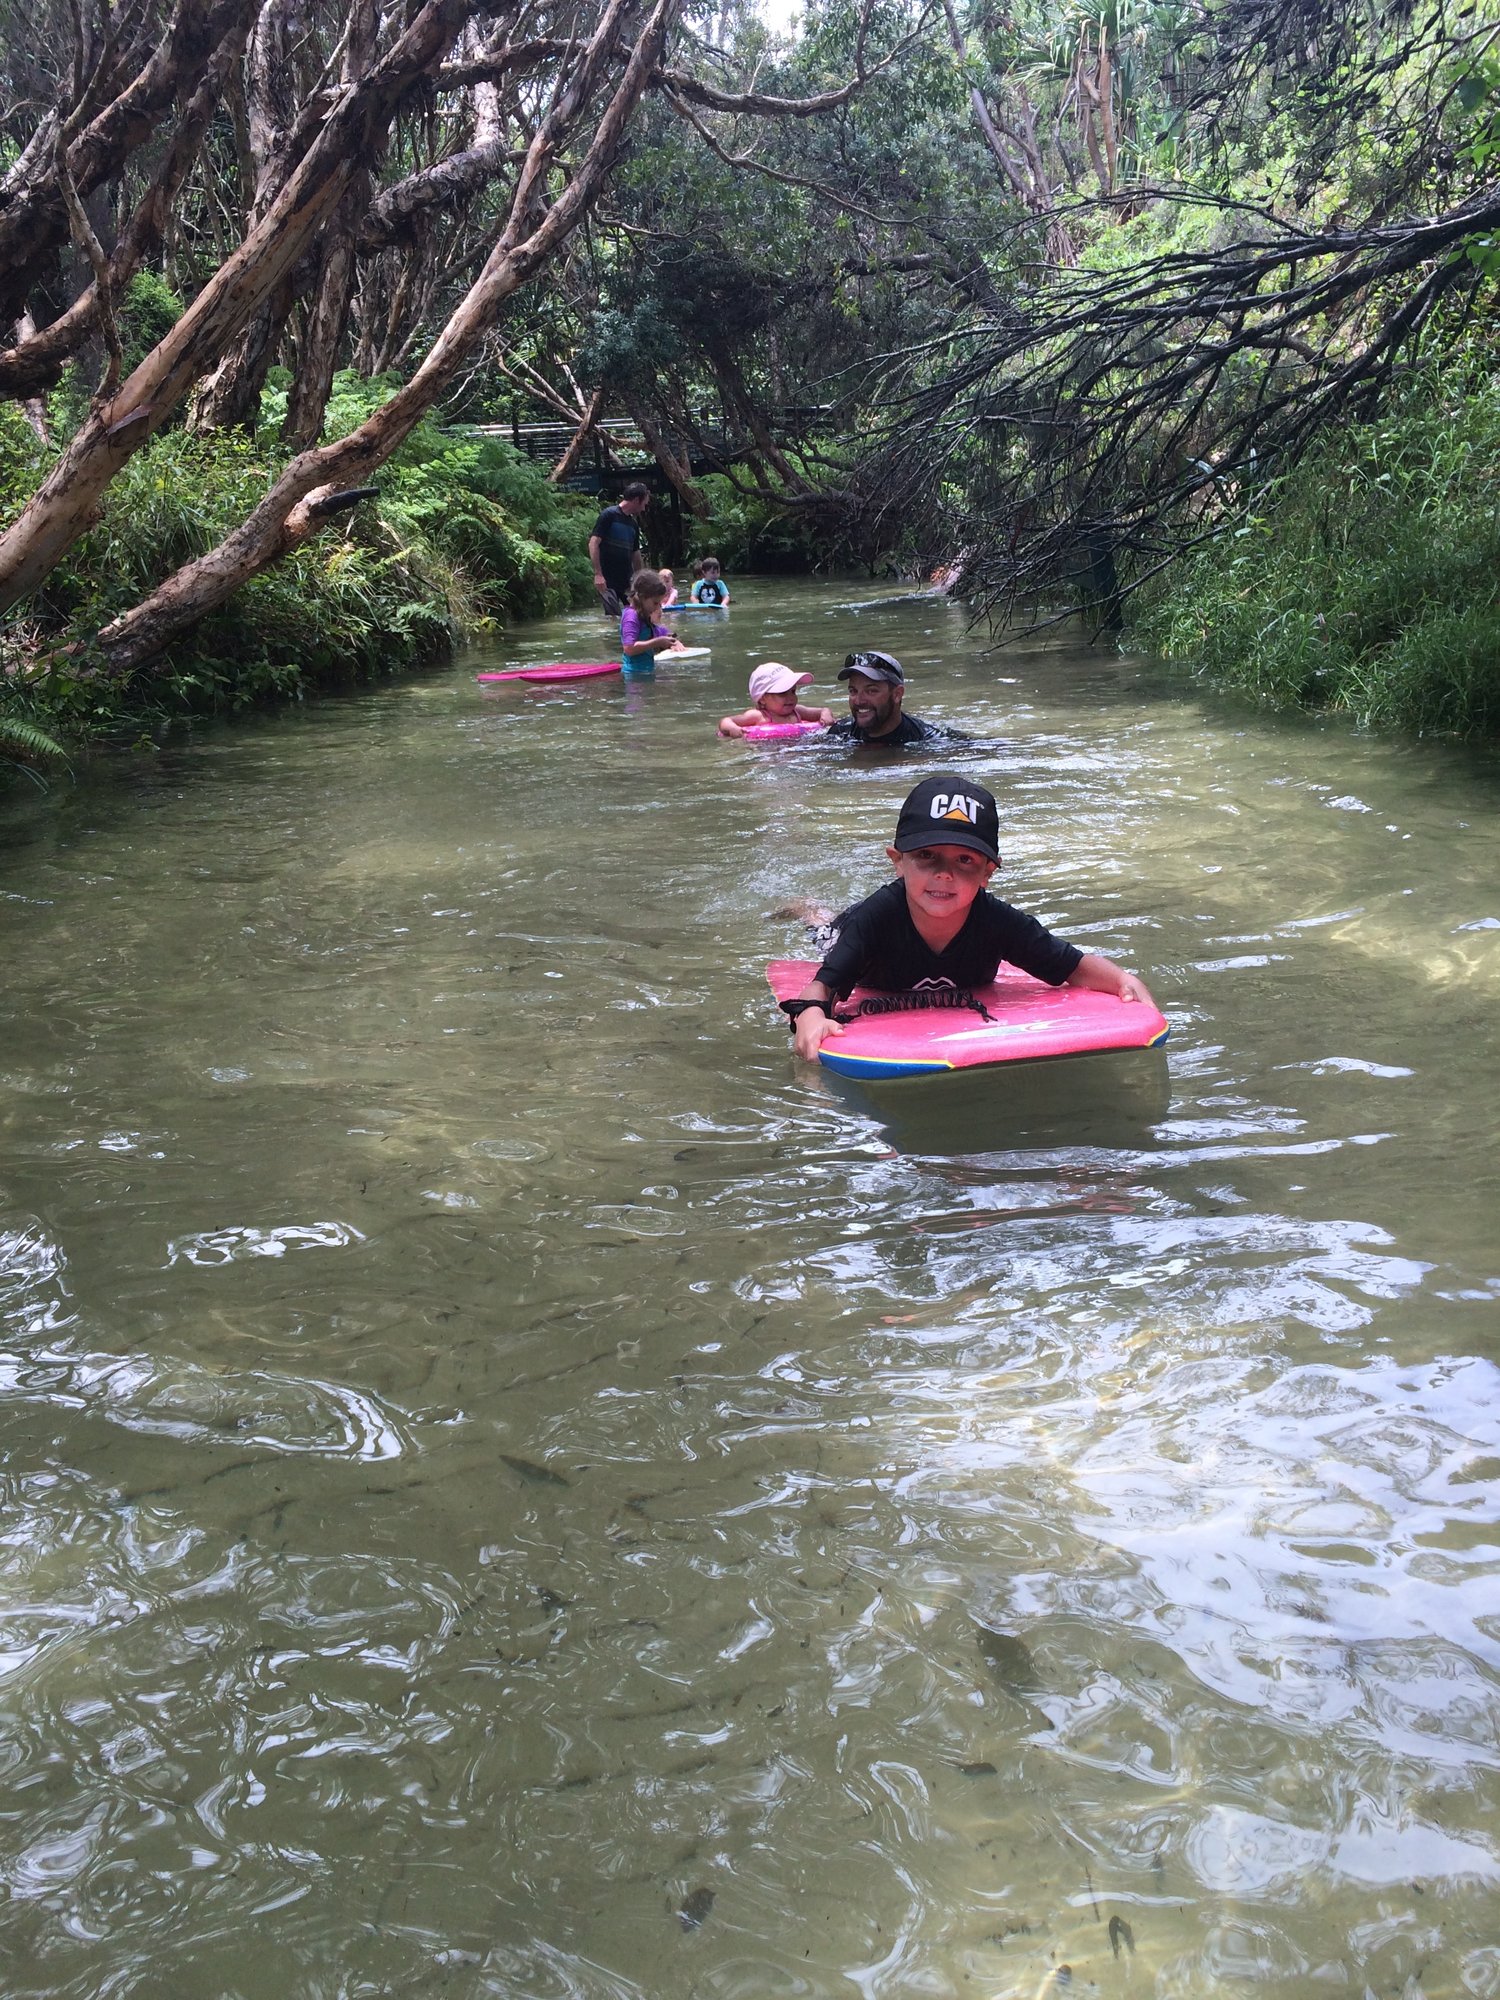 Eli Creek. Hop on a boogey board or inflatable ring and let the water carry you downstream.